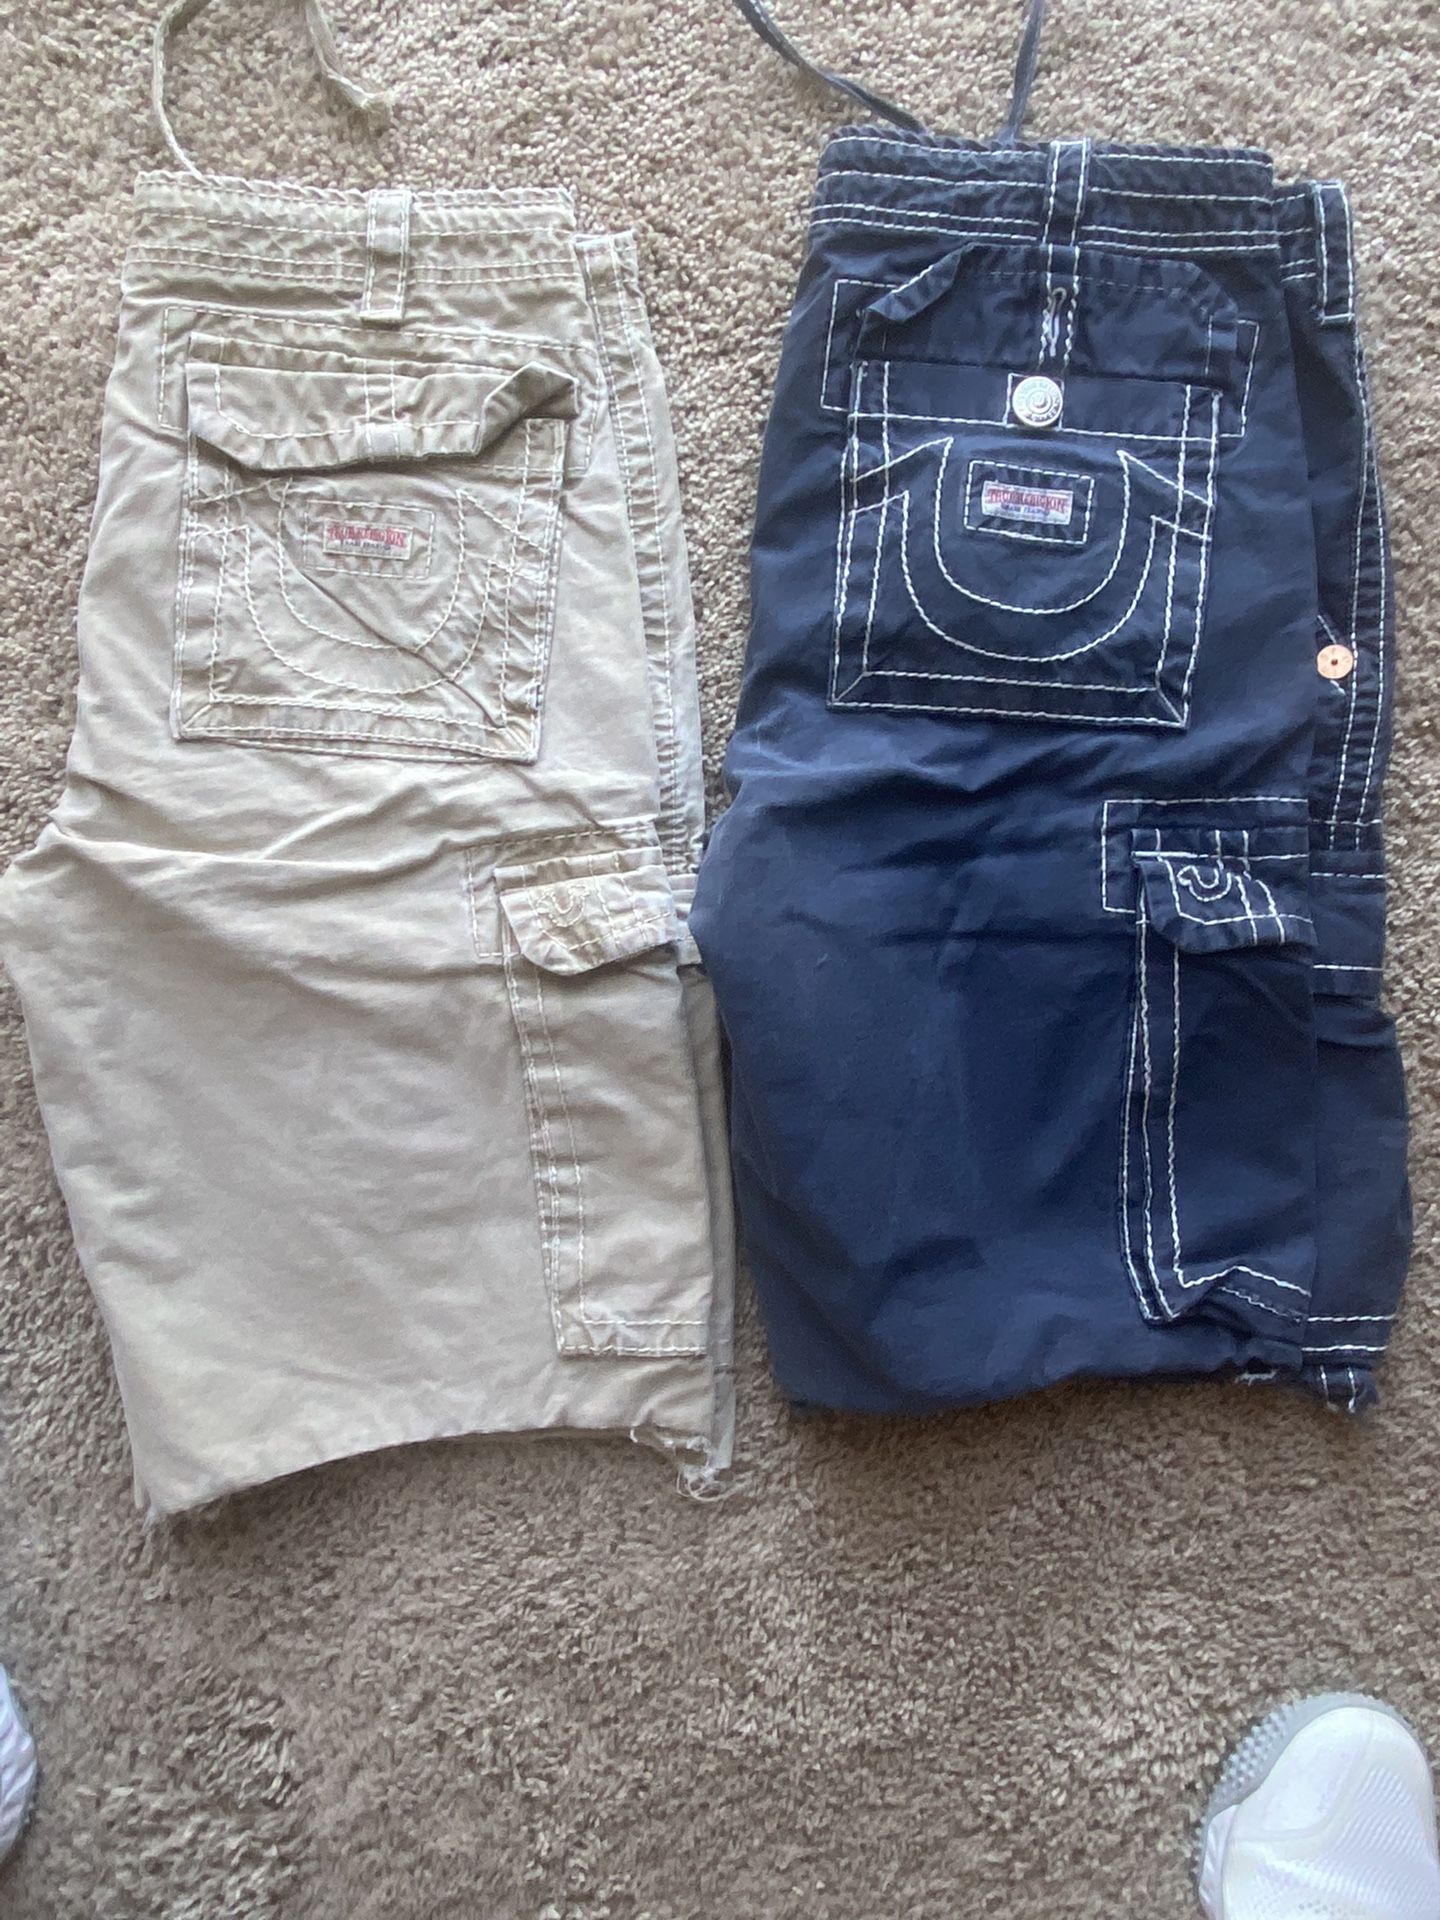 True Religion Cargo Shorts And jeans